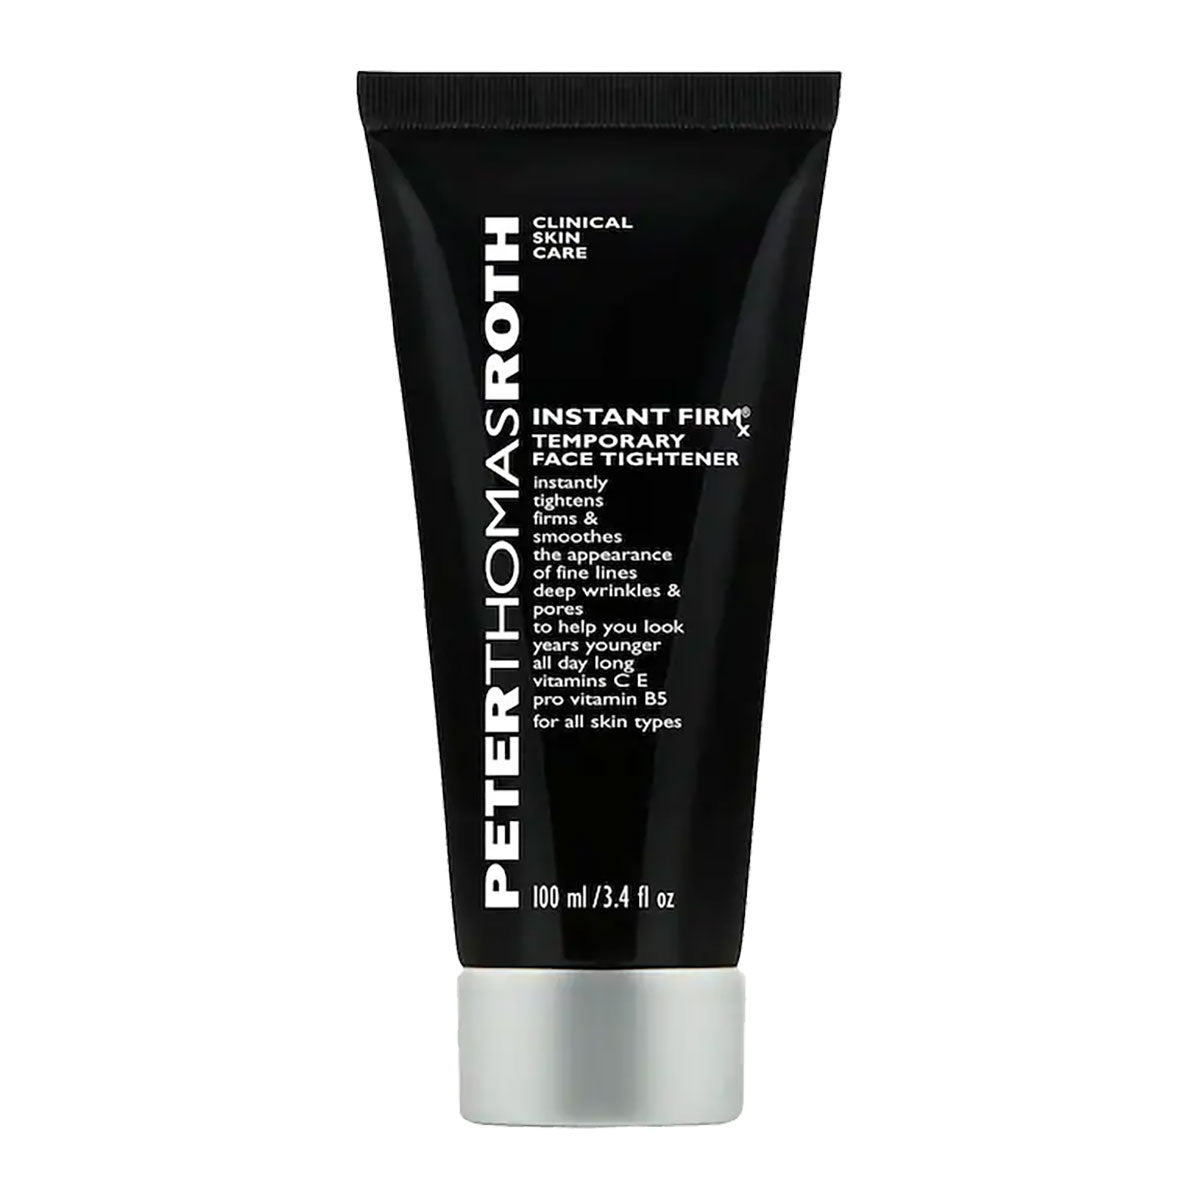 Peter Thomas Roth Instant FirmX Temporary Face Tightener 100 ml / 3.4 oz